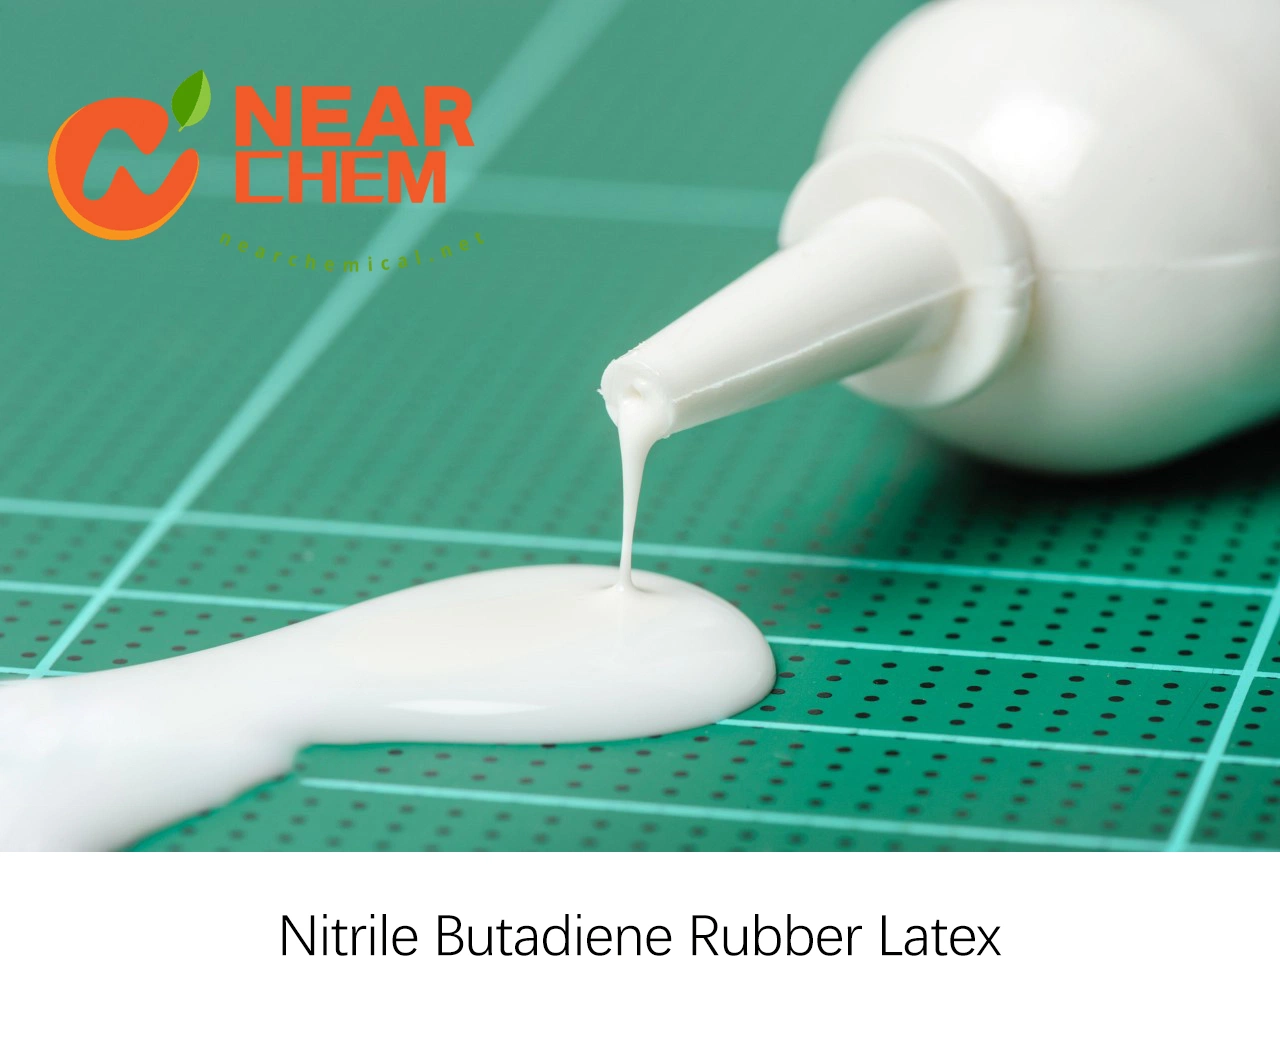 Hot Sale 44% Nitrile Butadiene Rubber Latex/Nbrl with Stable Quality